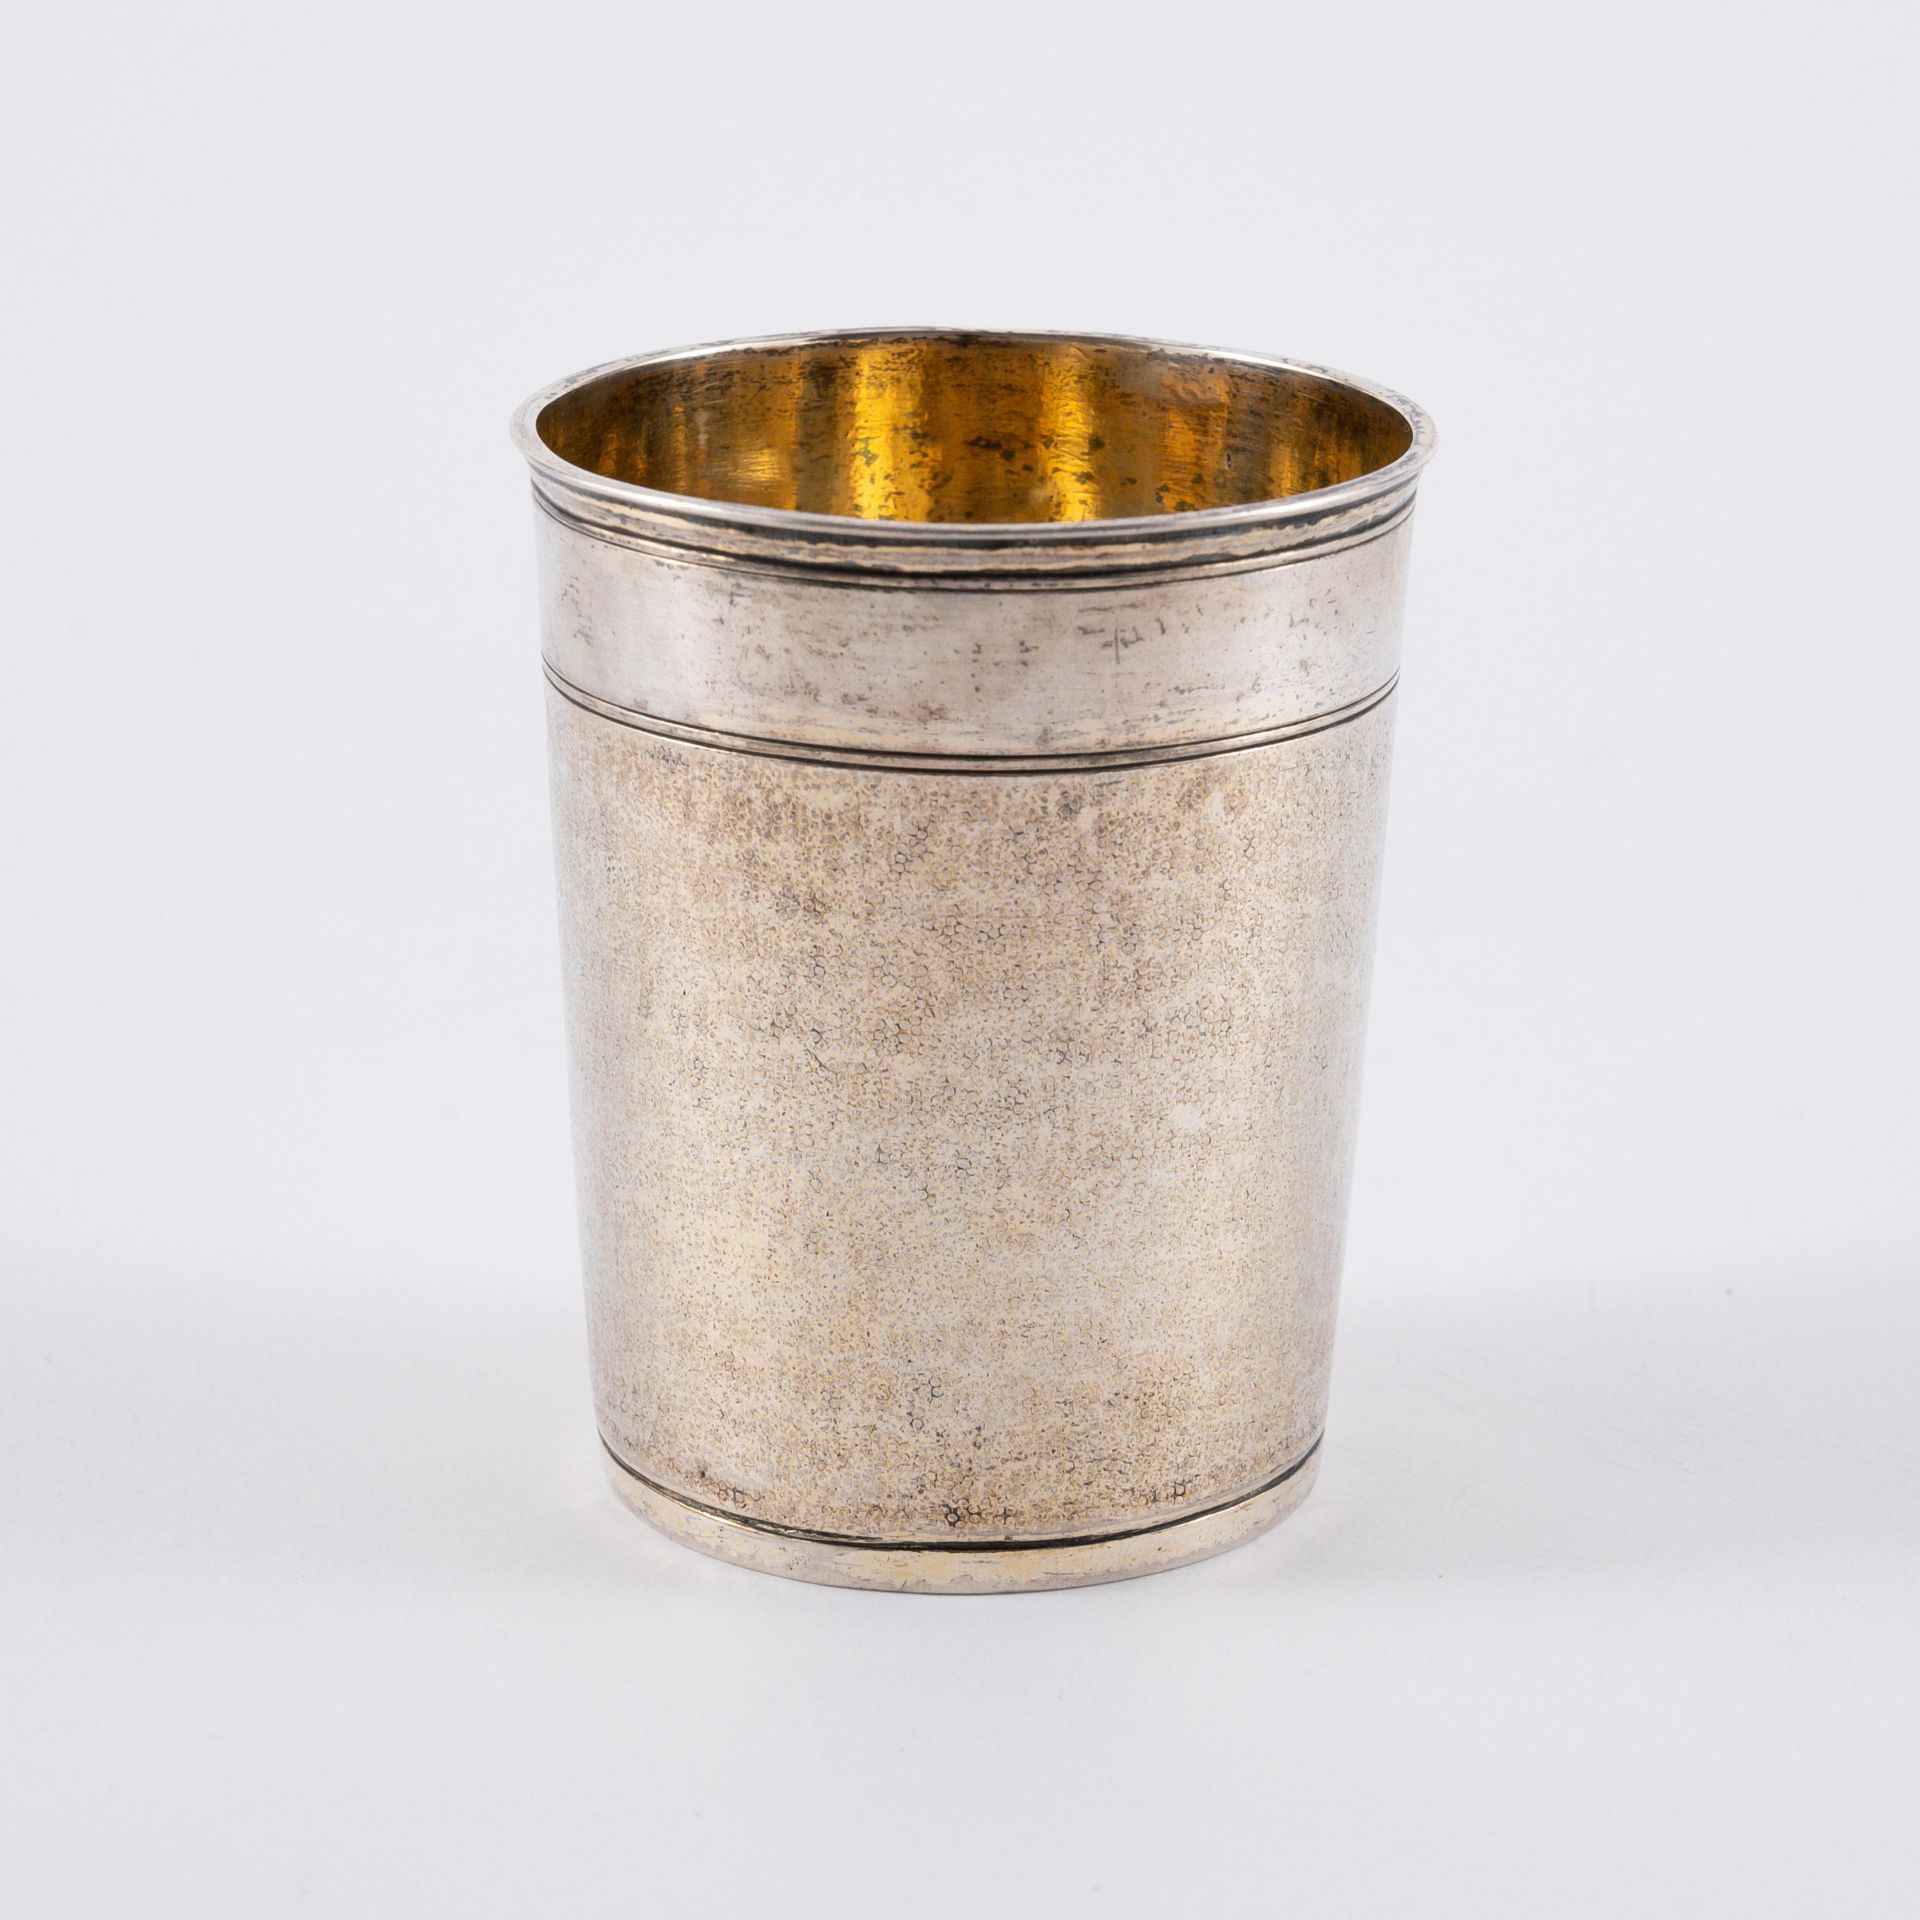 Paul Solanier: SILVER SNAKE SKIN CUP - Image 3 of 6